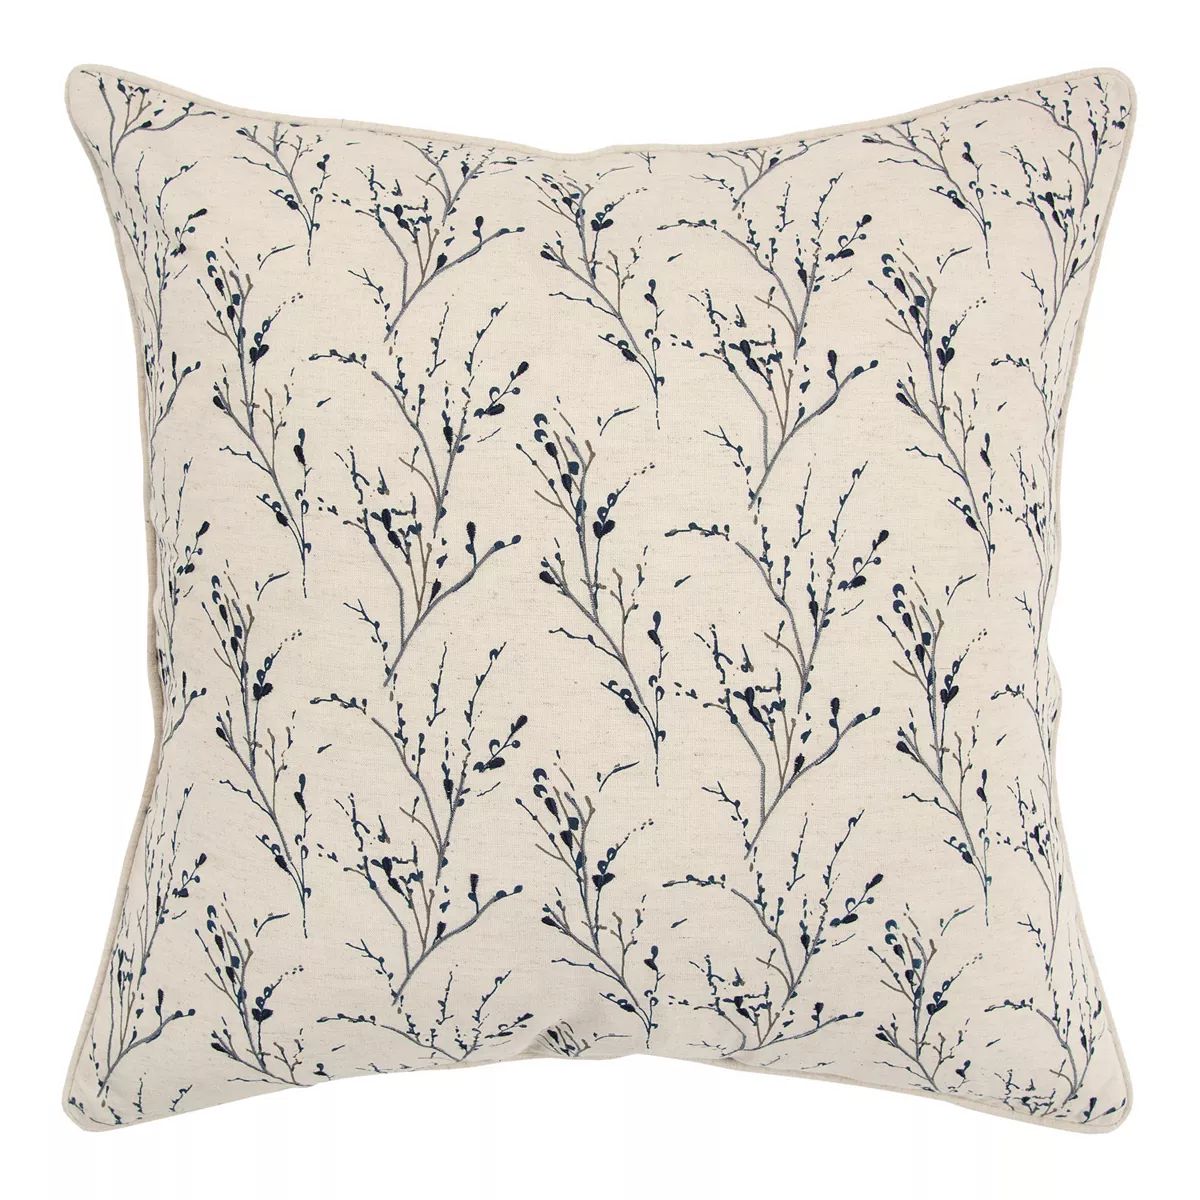 Rizzy Home Berry Throw Pillow | Kohl's